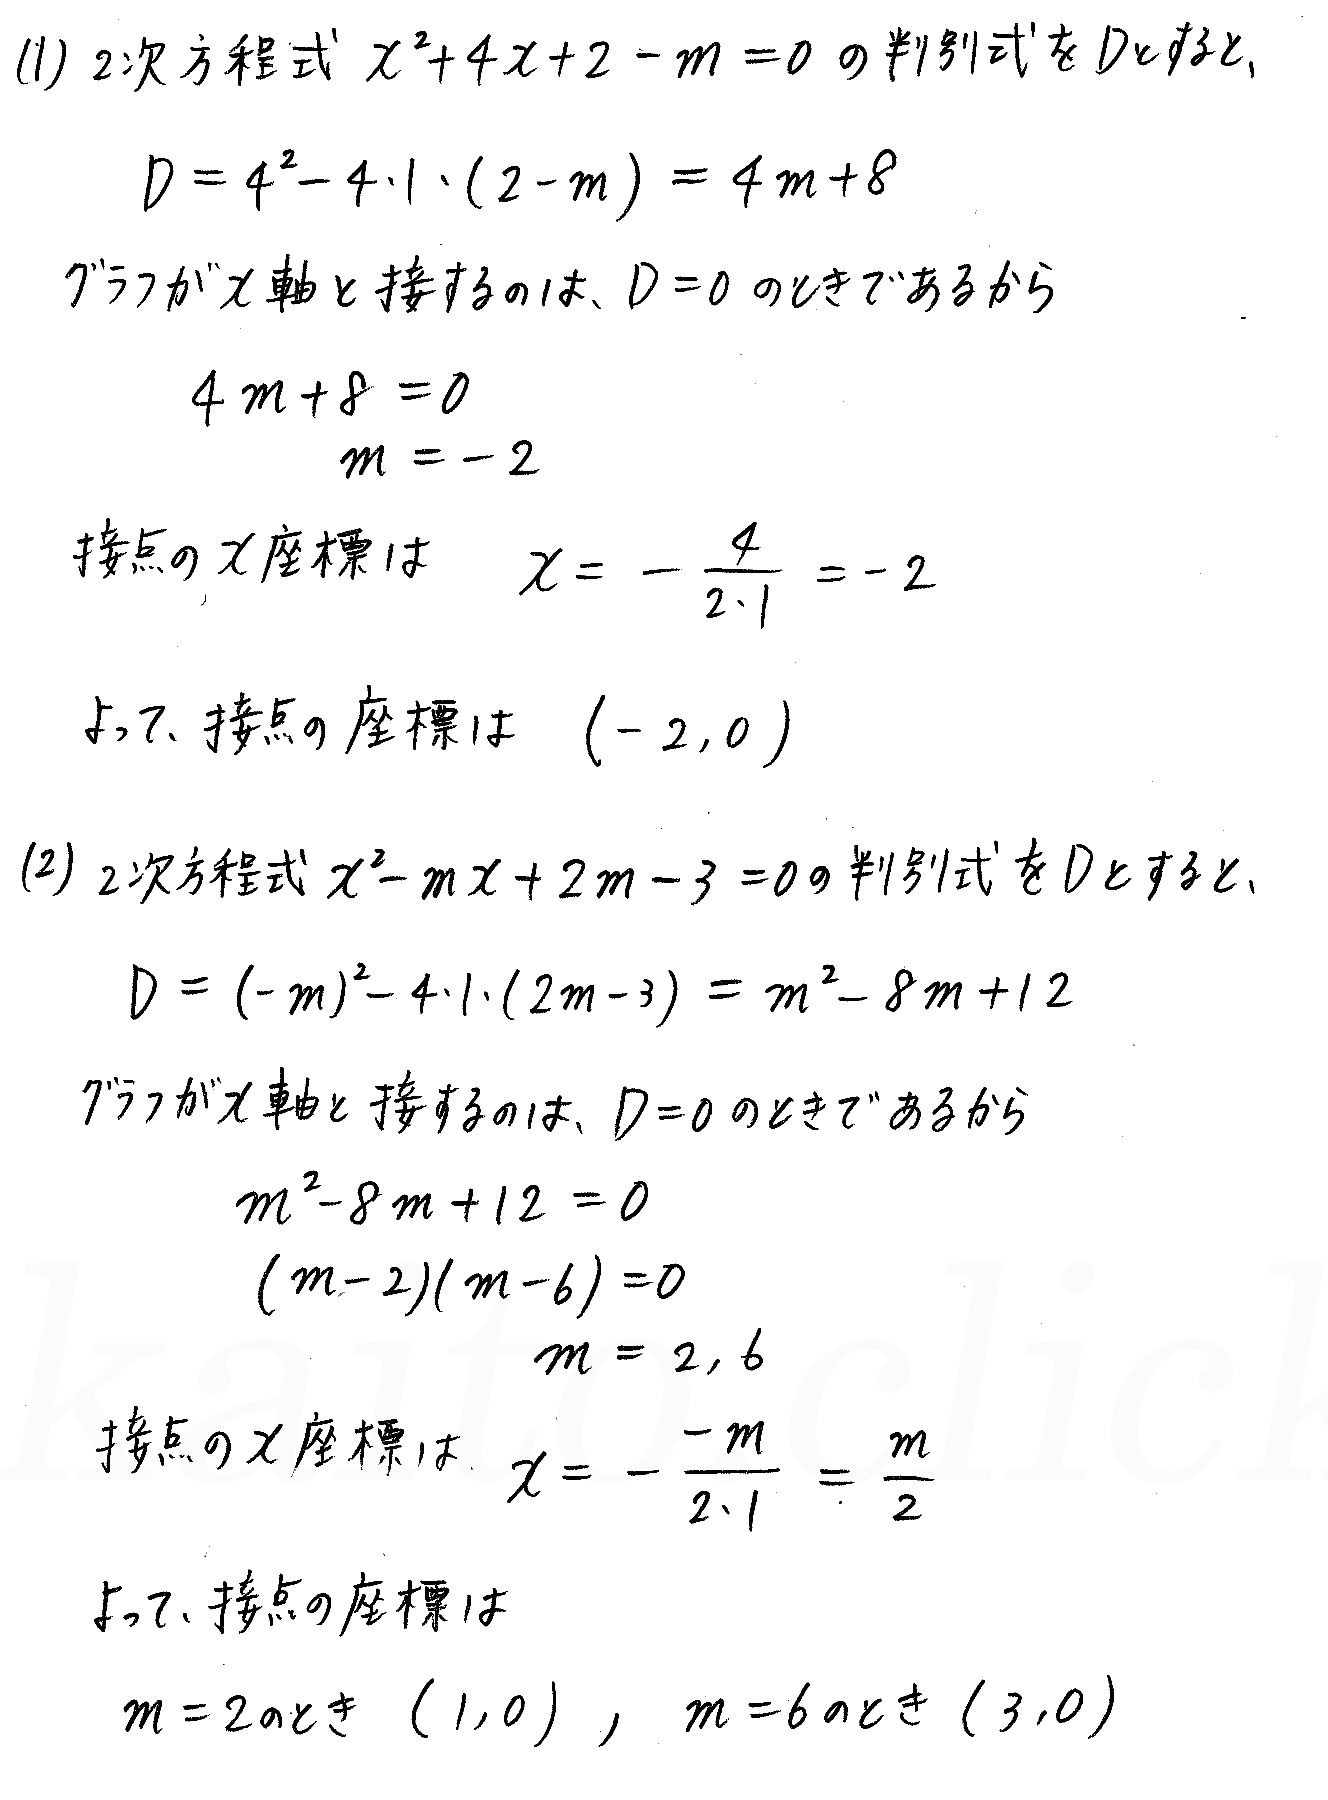 clear数学Ⅰ-234解答 